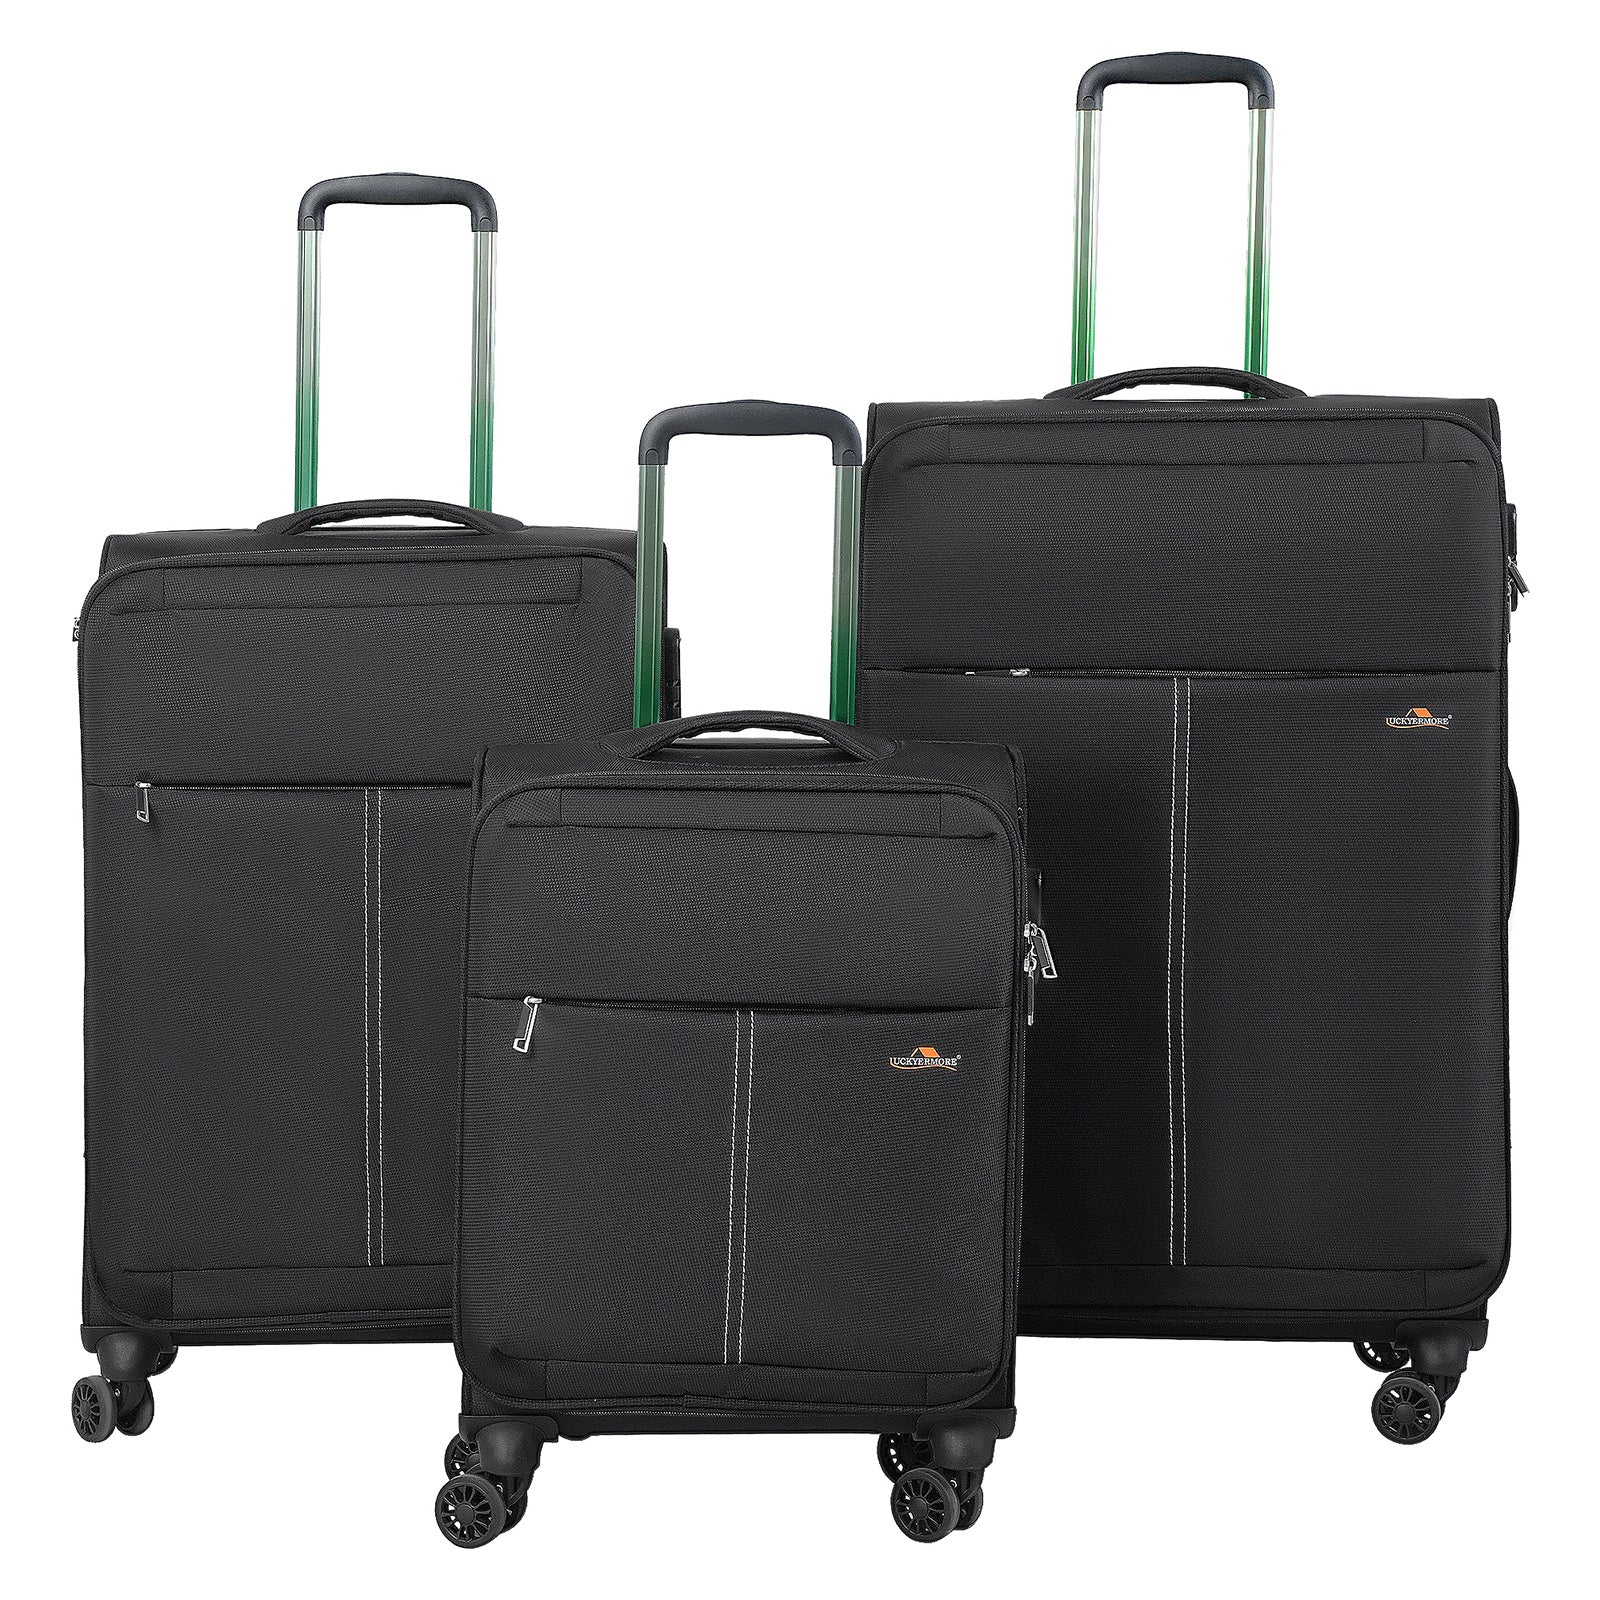 3-Piece Luggage Sets 20"/24"/28" with Wheels and Smooth Trolley Lightweight Expandable Suitcase Set, Black